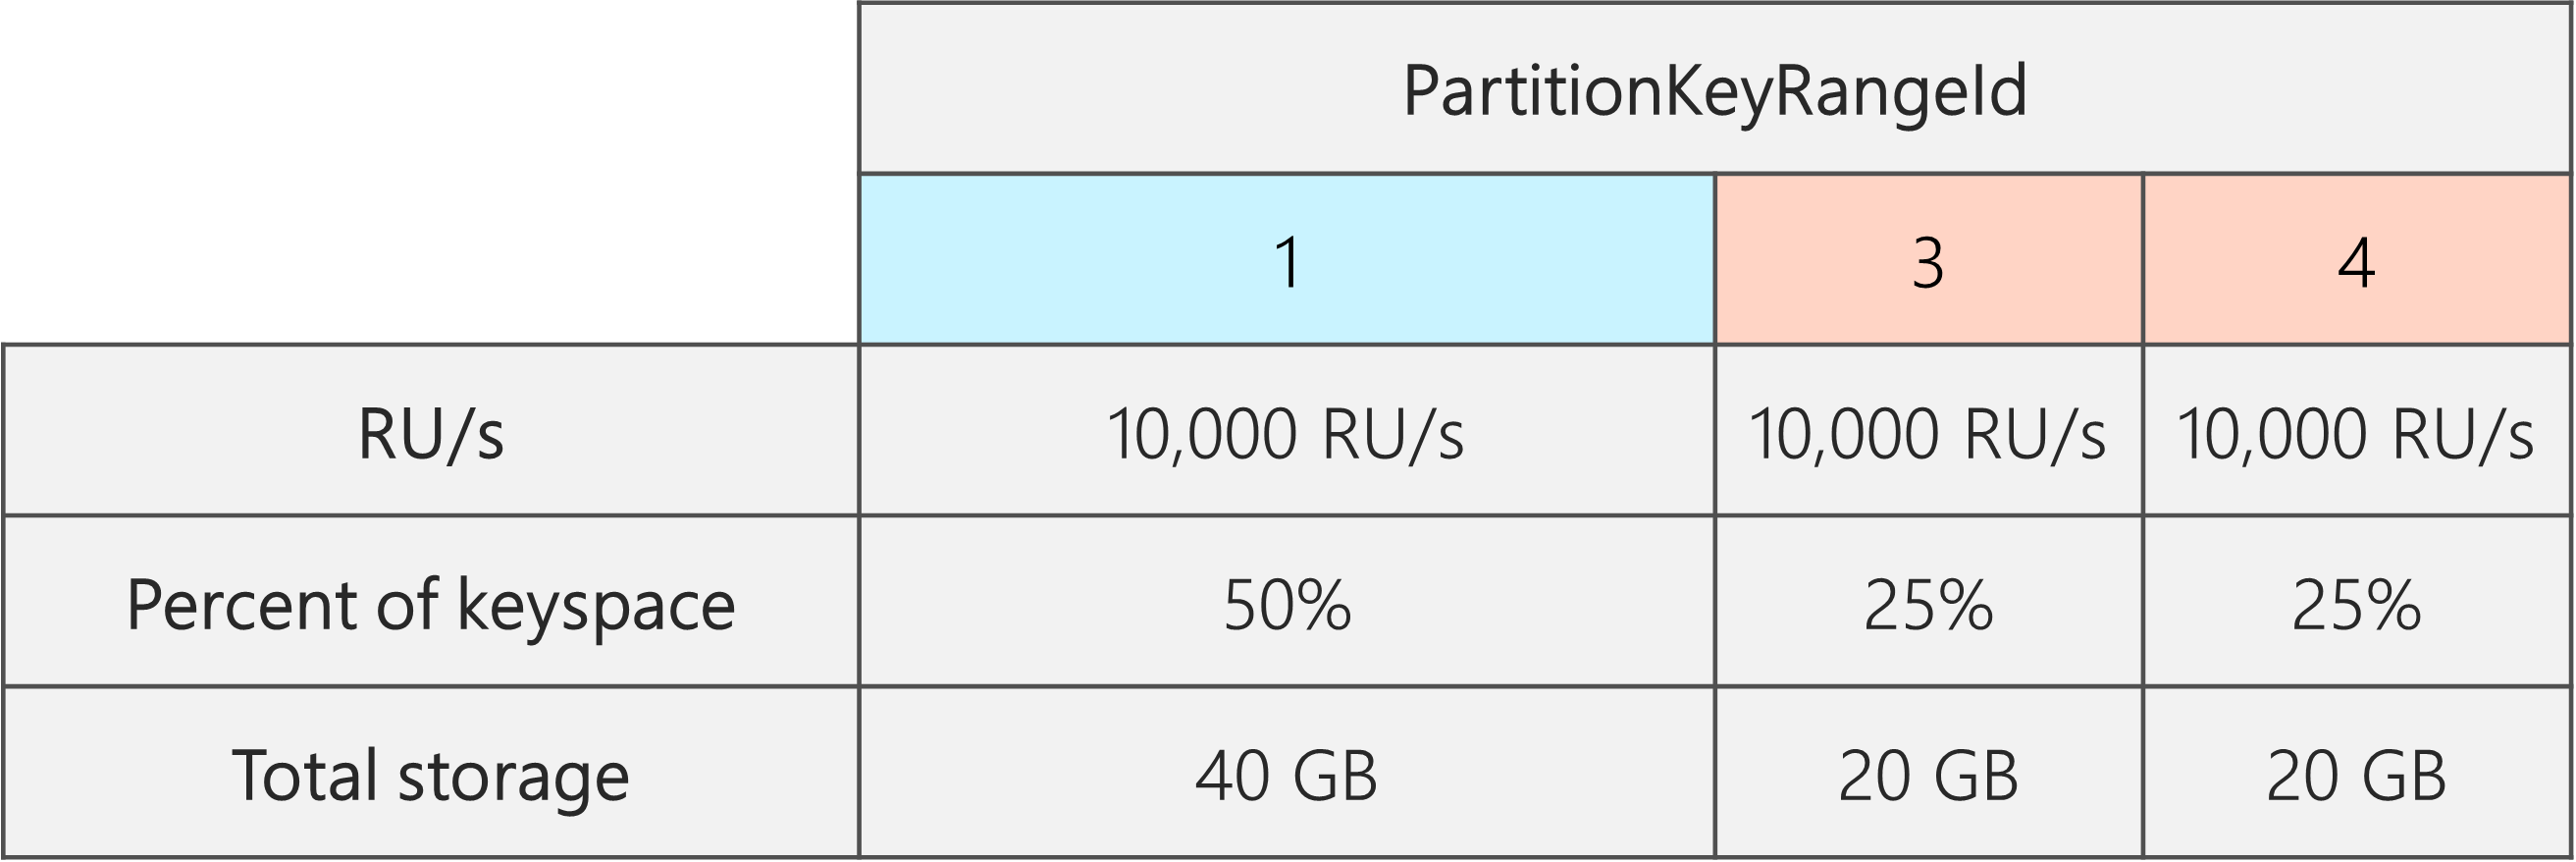 After the split, there are 3 PartitionKeyRangeIds, each with 10,000 RU/s. However, one of the PartitionKeyRangeIds has 50% of the total keyspace (40 GB), while two of the PartitionKeyRangeIds have 25% of the total keyspace (20 GB)